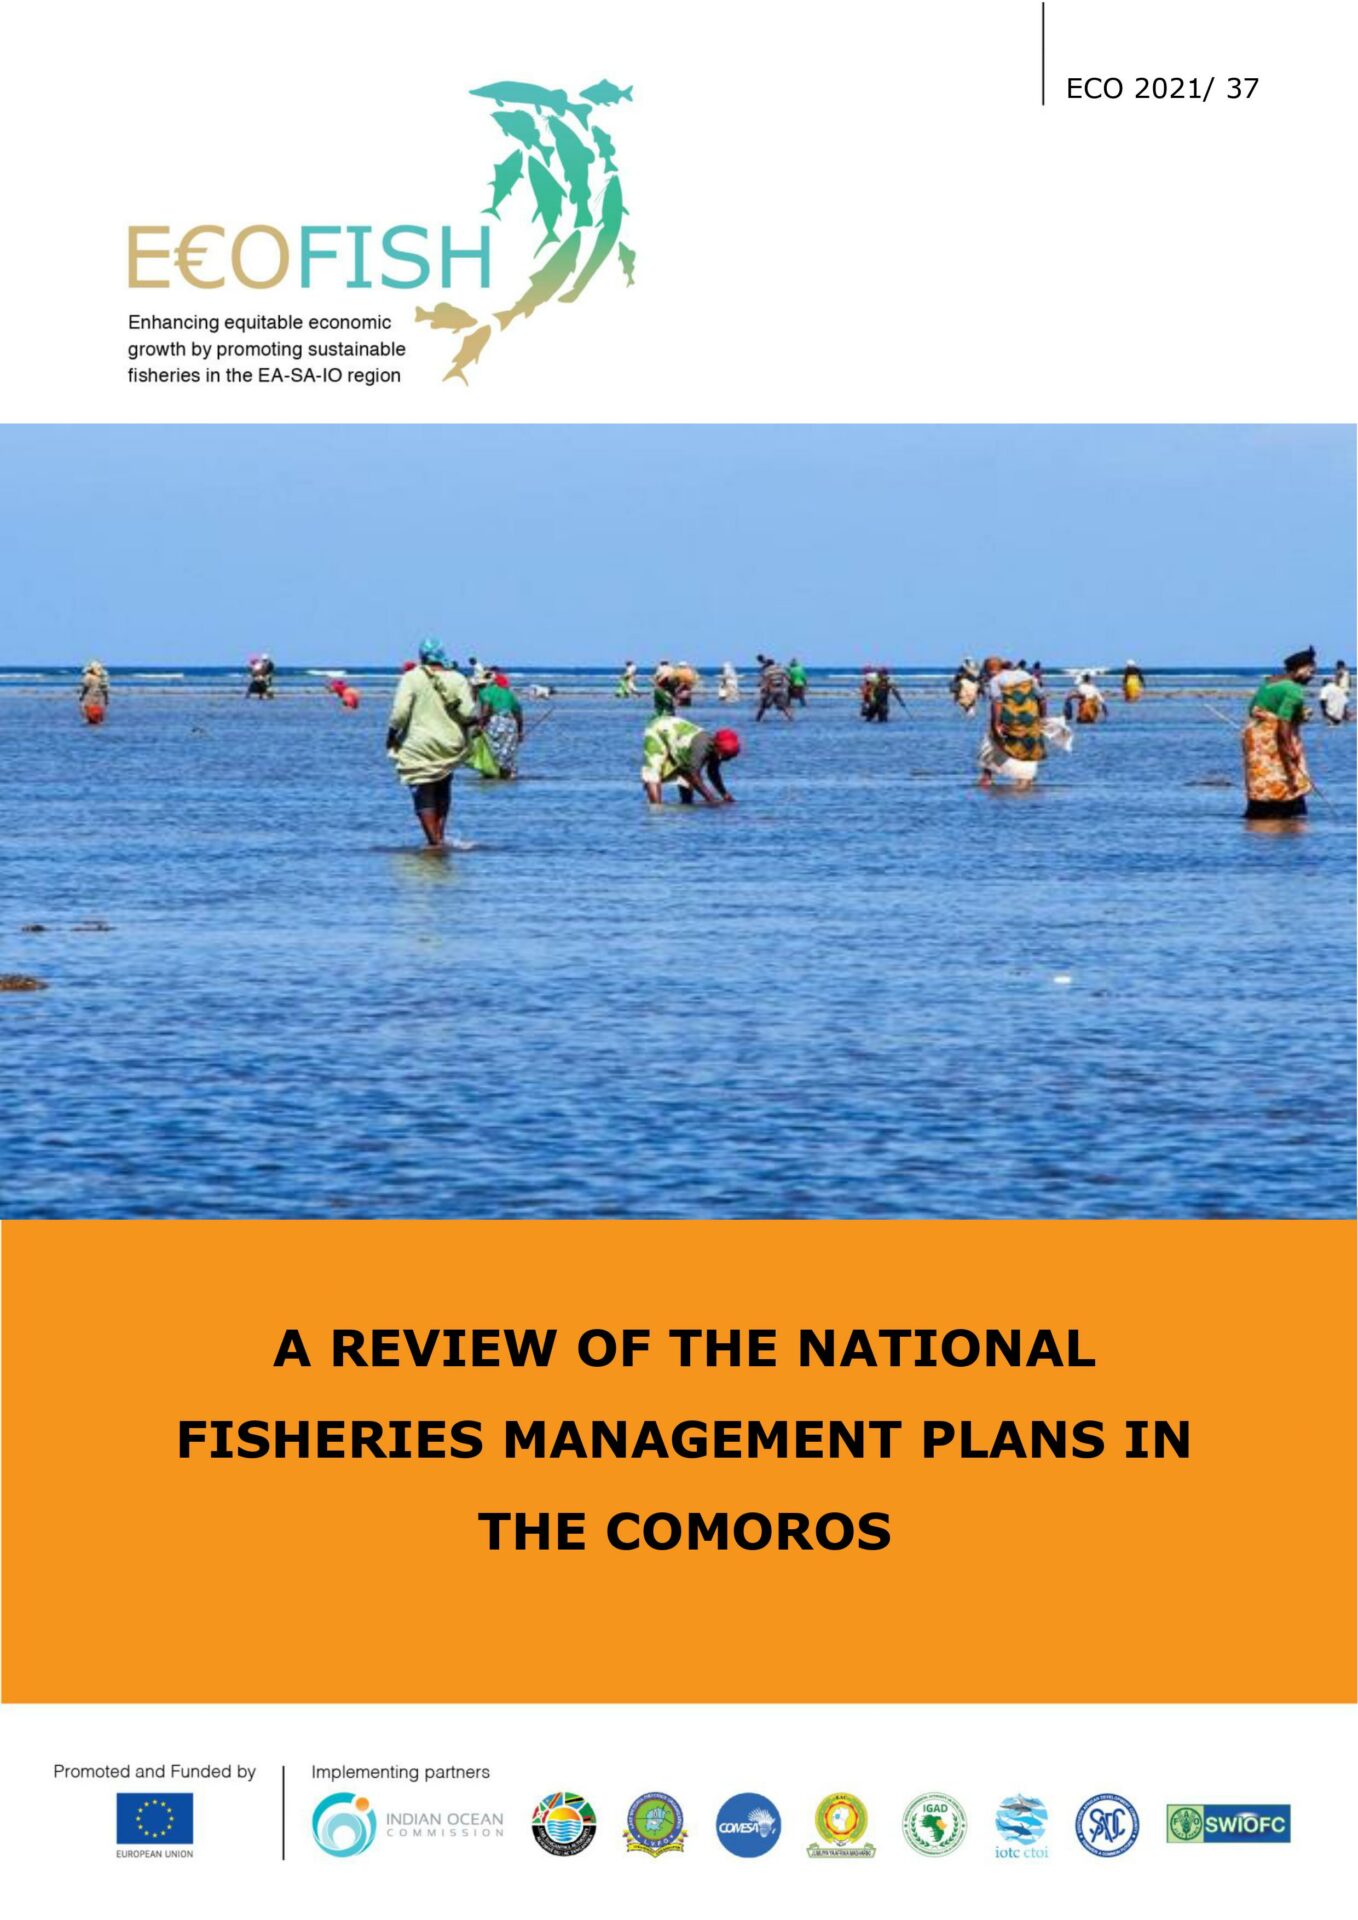 A REVIEW OF THE NATIONAL FISHERIES MANAGEMENT PLANS IN THE COMOROS